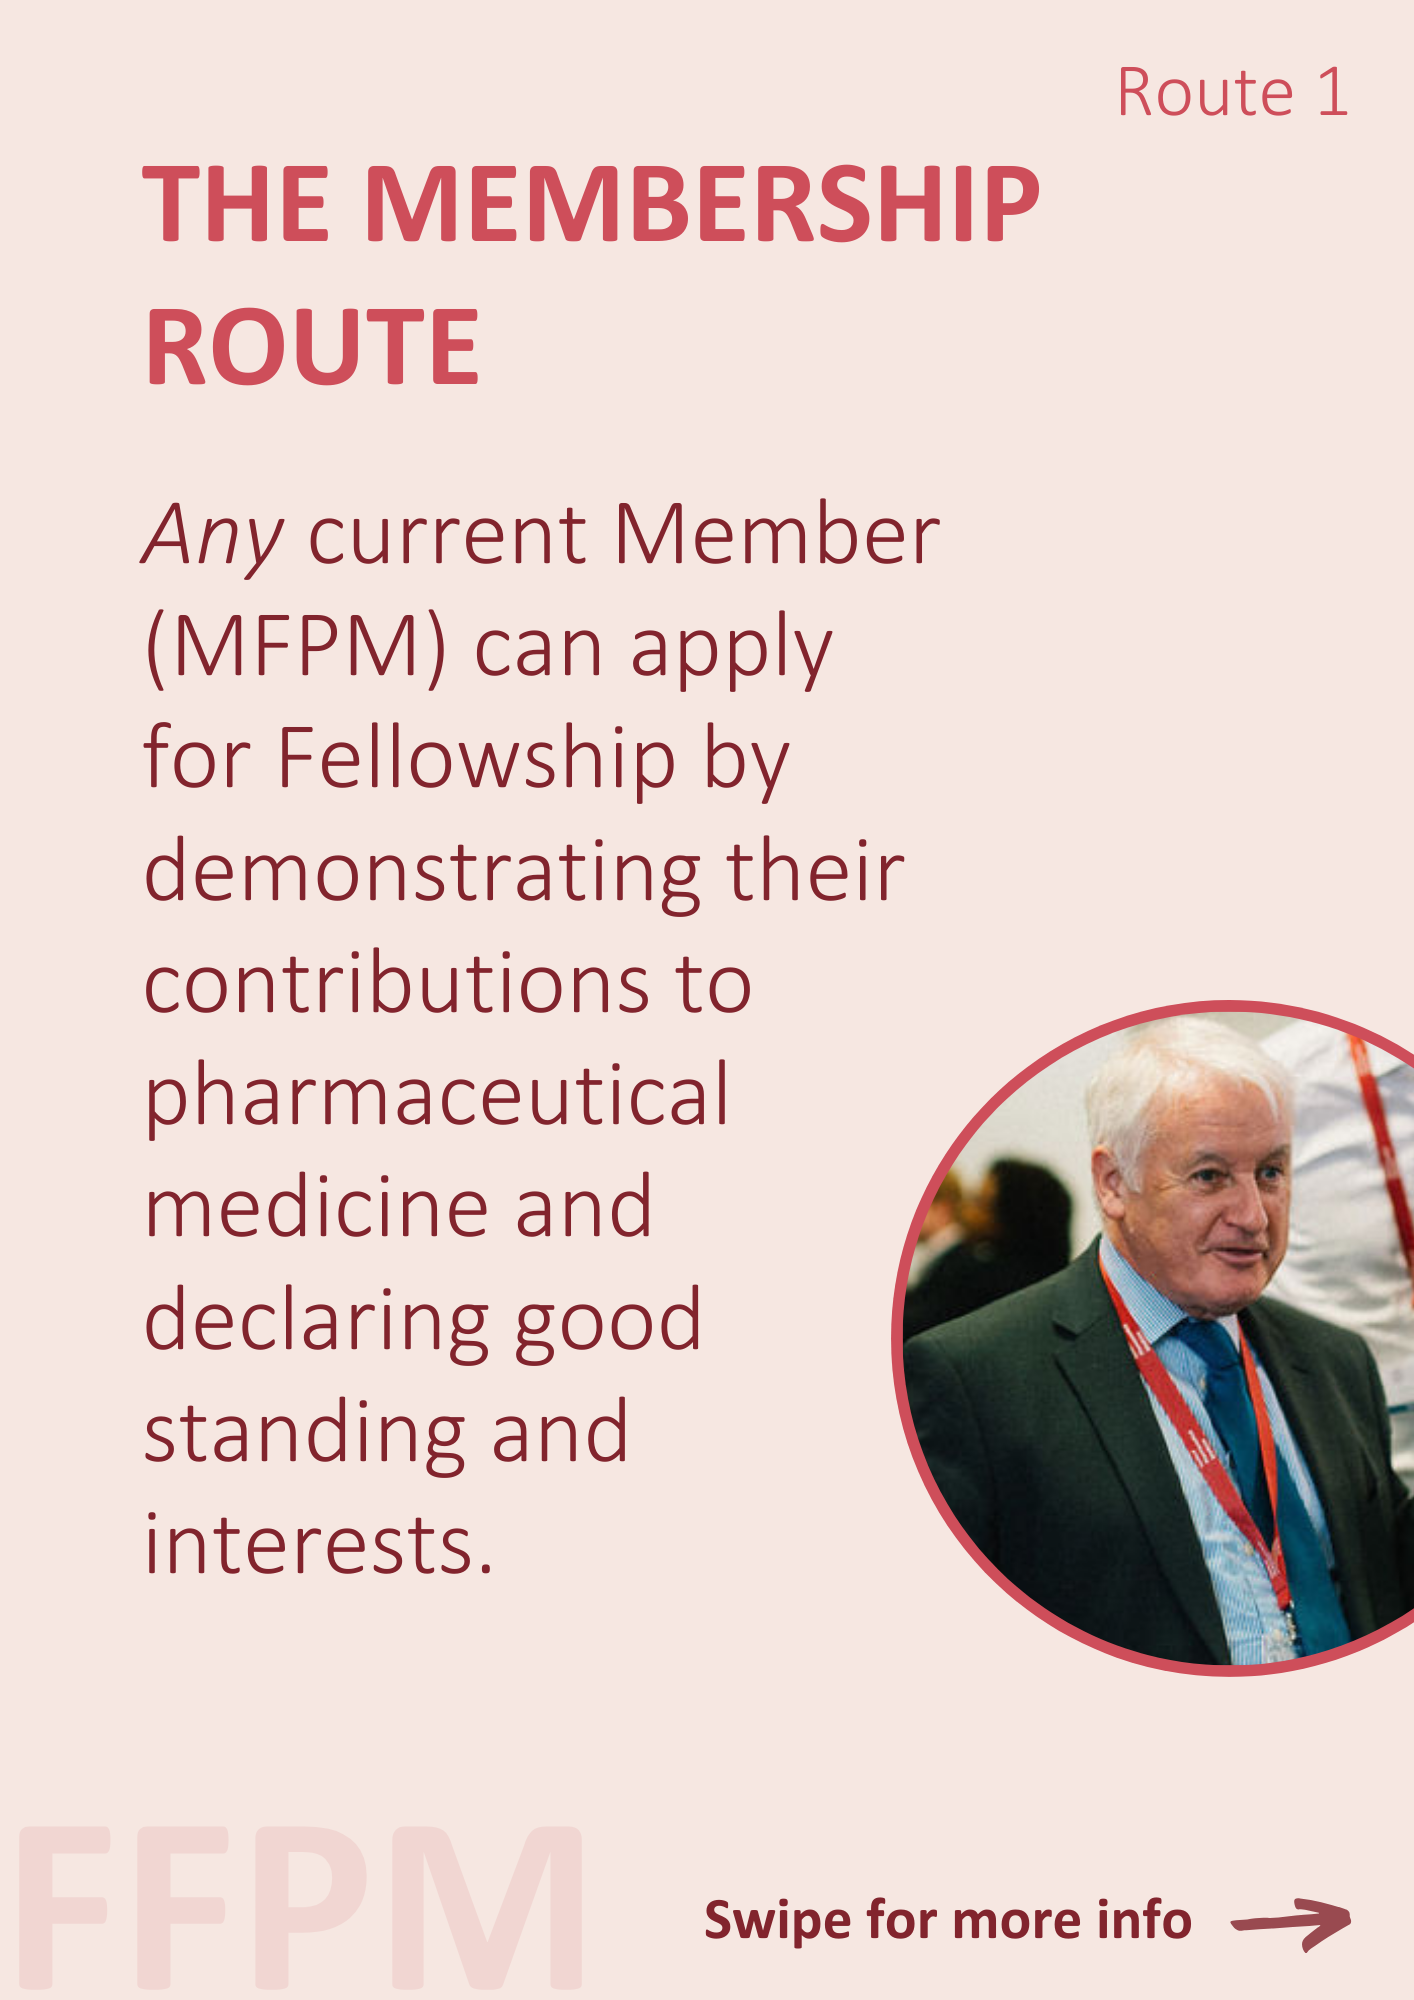 The membership route. Any current Member (MFPM) can apply for Fellowship by demonstrating their contributions to pharmaceutical medicine and declaring good standing and interests.